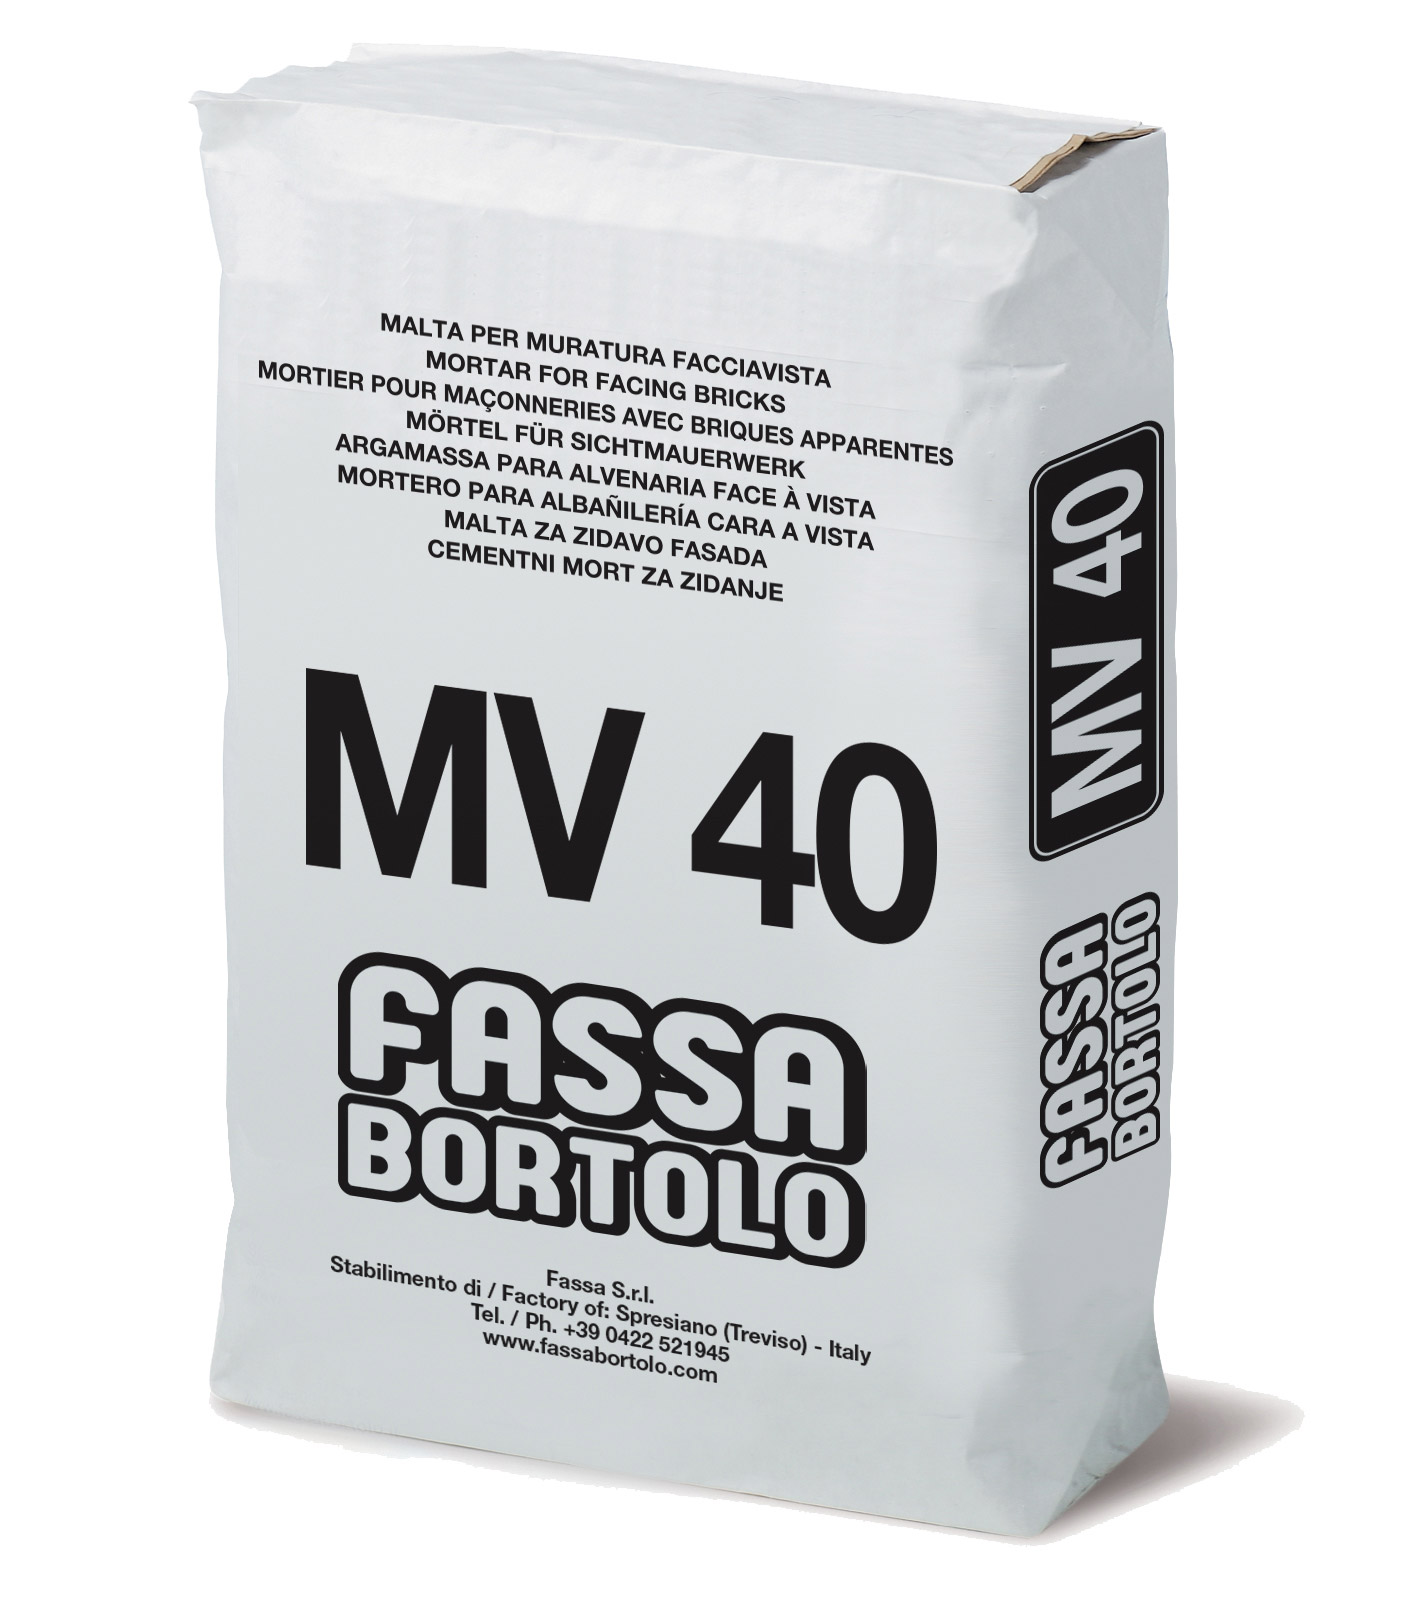 MV 40: Mortar for facing brick walls made from lime and cement, for interiors and exteriors